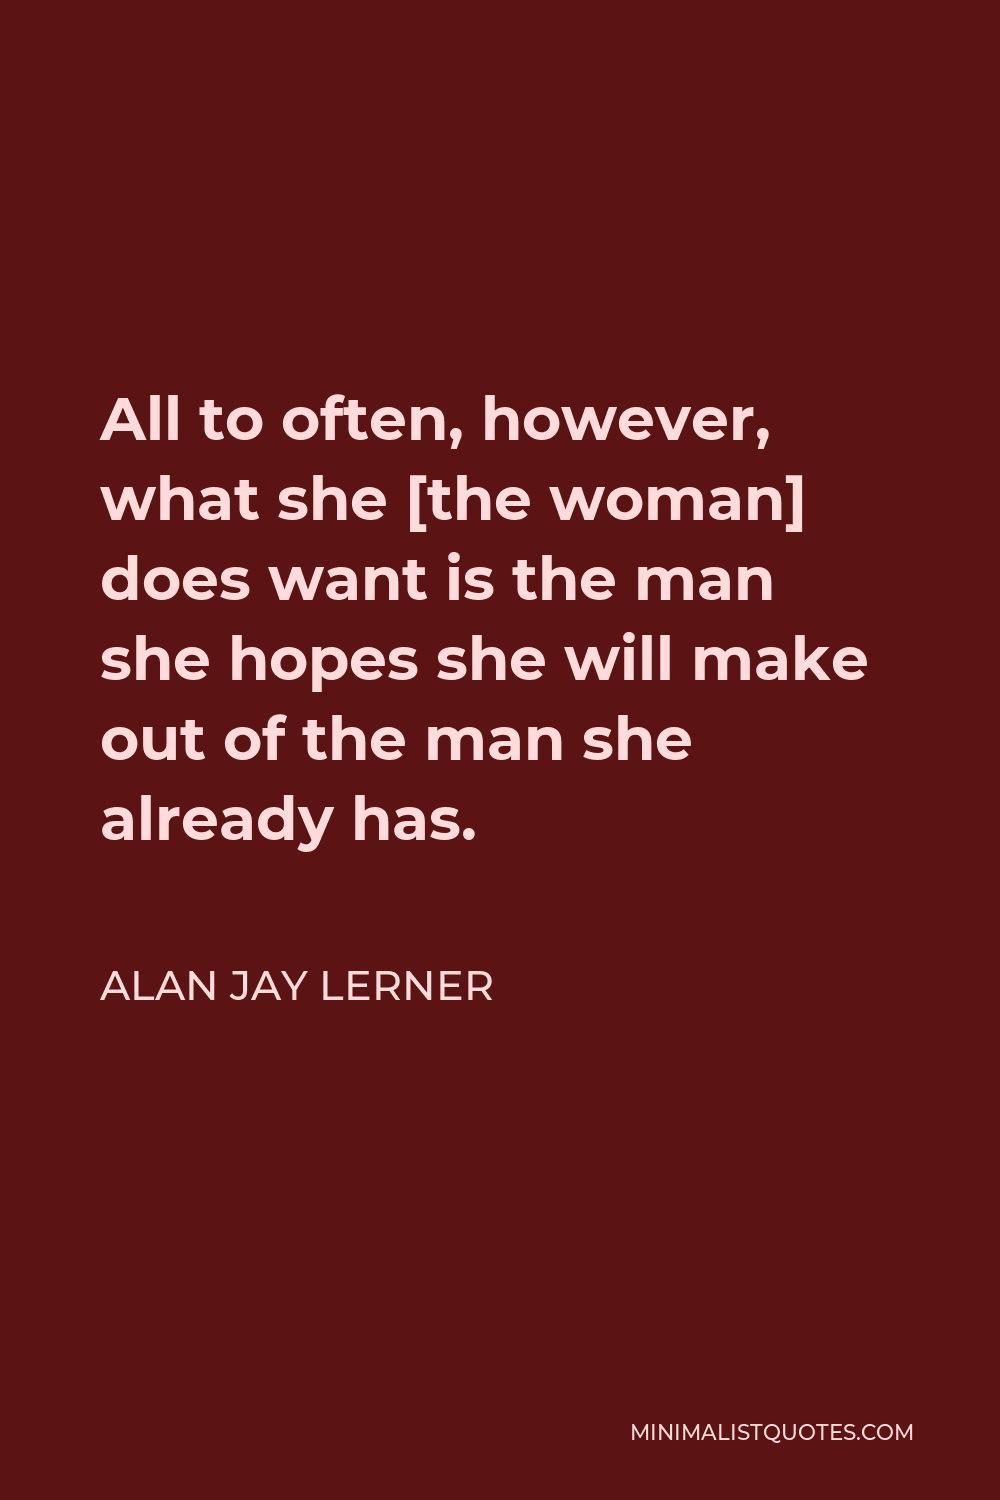 Alan Jay Lerner Quote - All to often, however, what she [the woman] does want is the man she hopes she will make out of the man she already has.